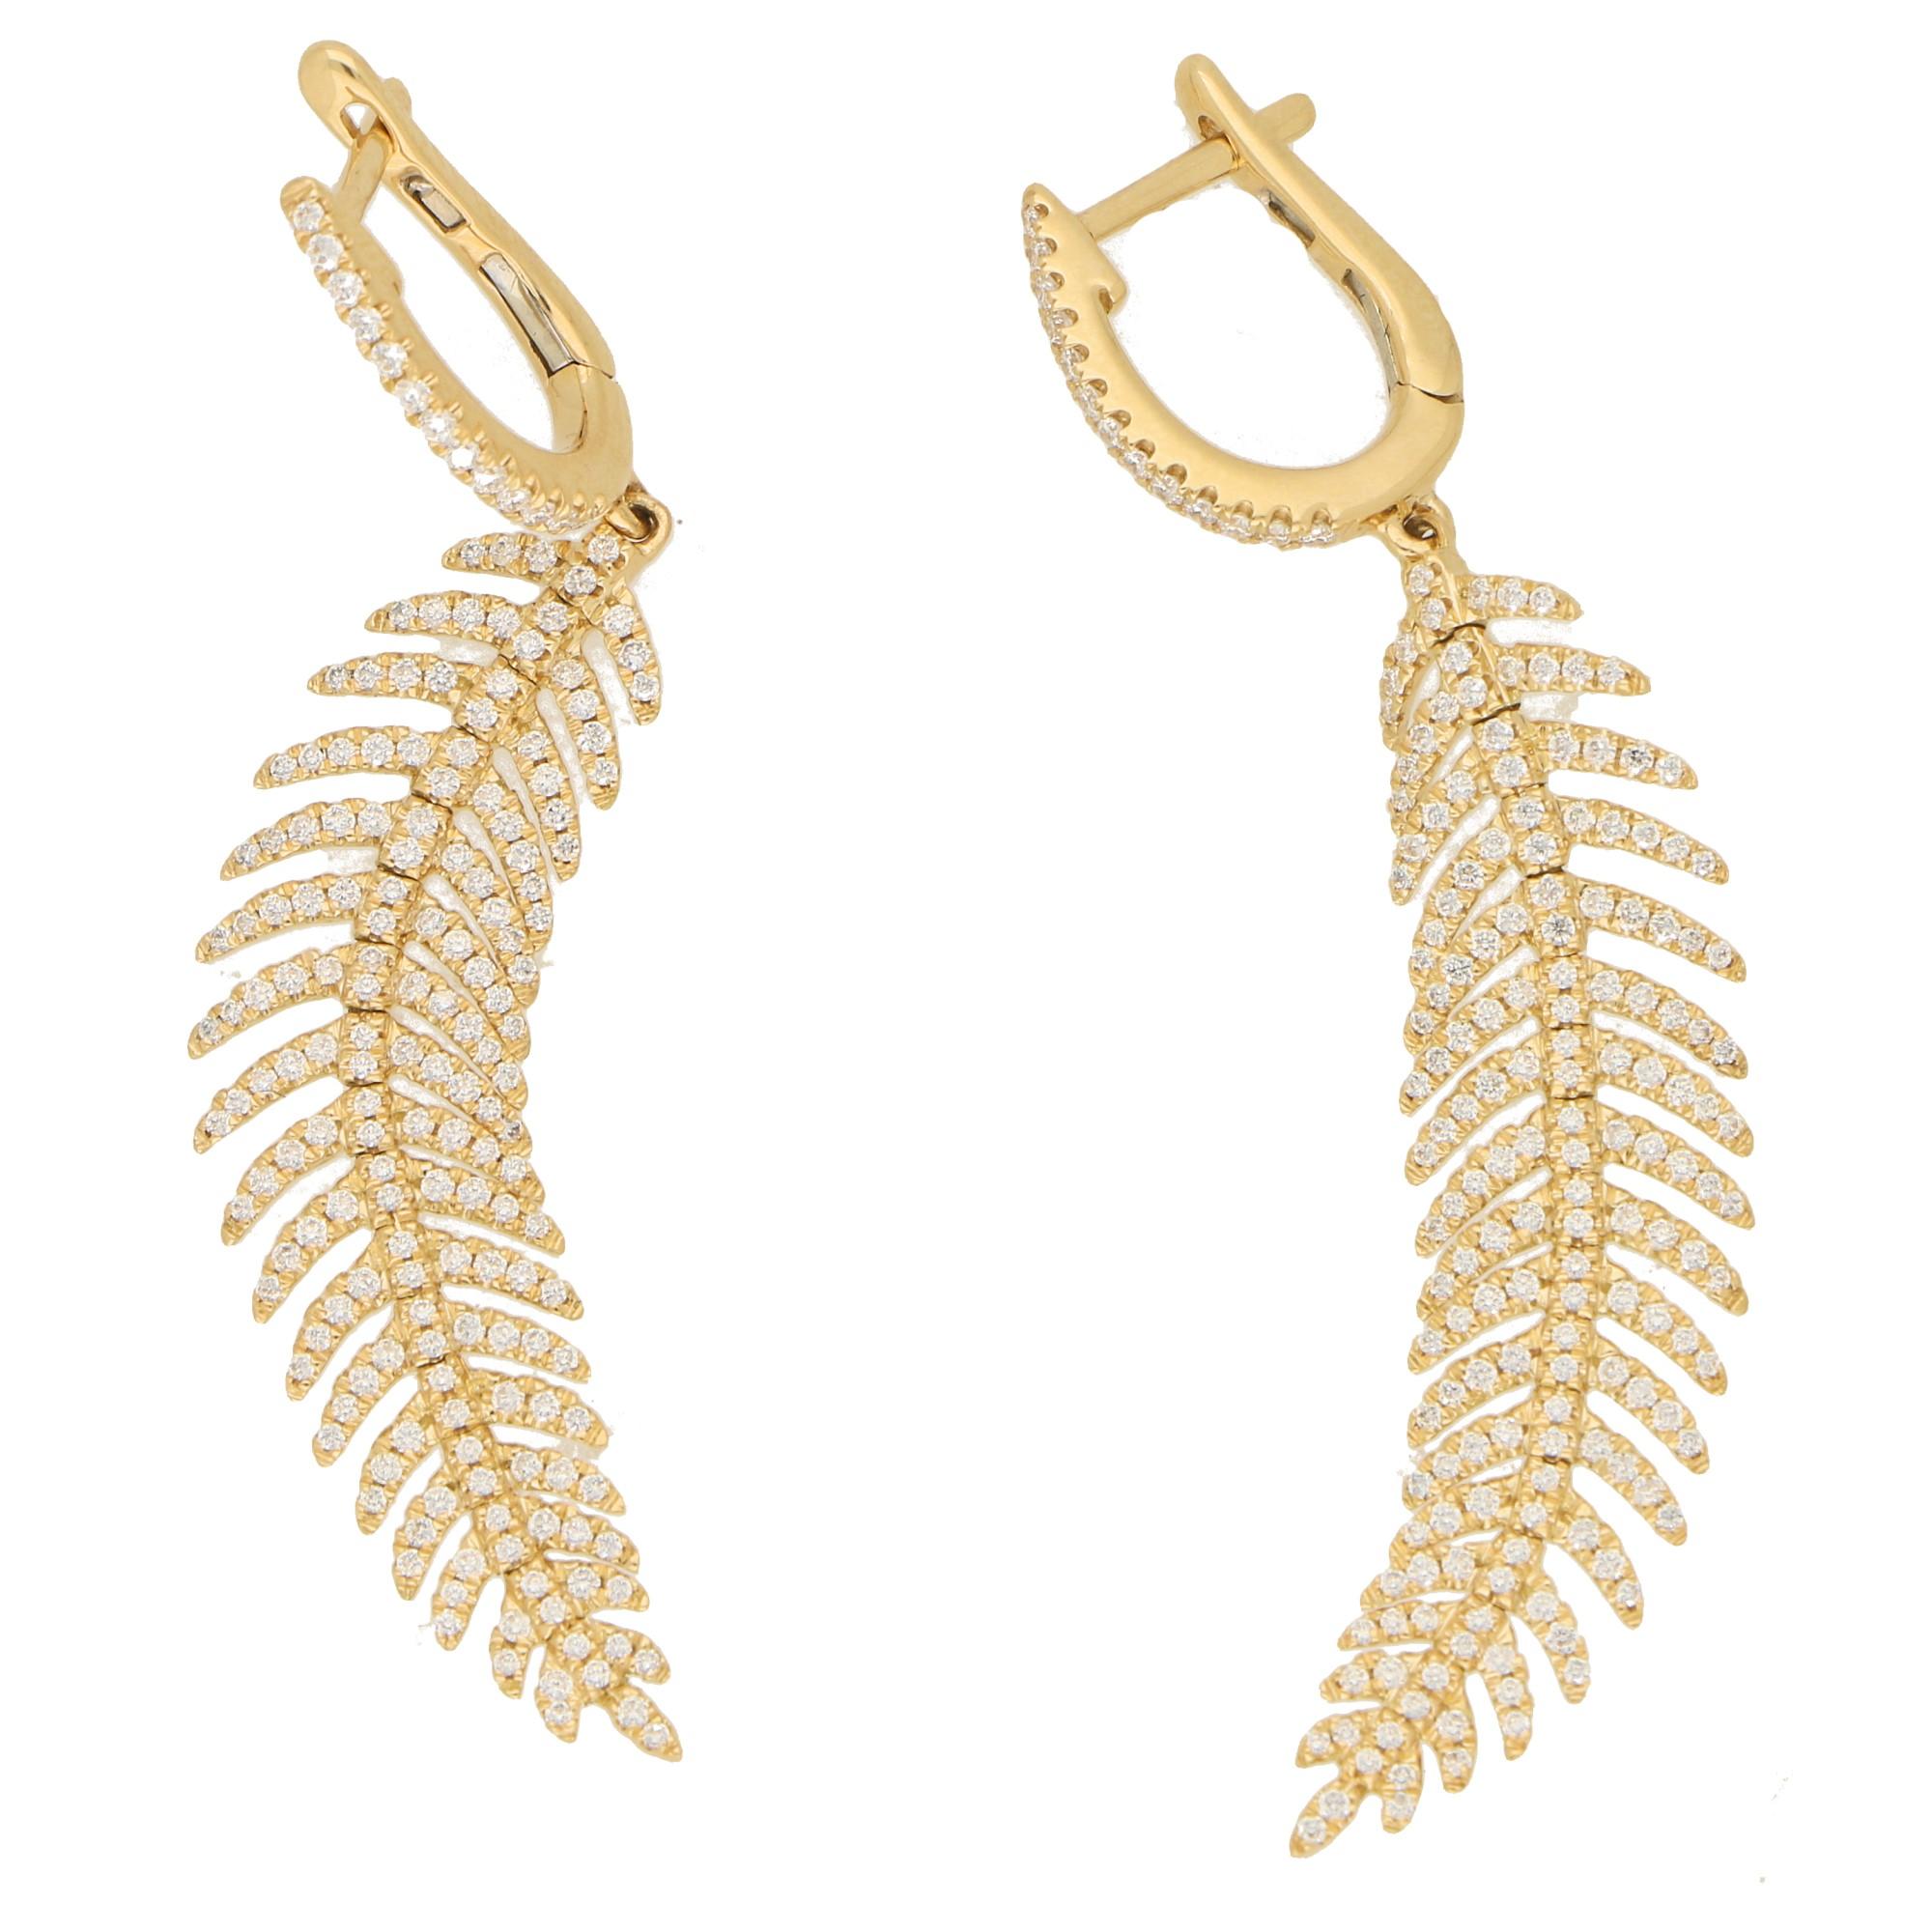 A gorgeous pair of articulated feather diamond drop earrings set in 18k yellow gold. 

Each earring depicts a beautiful feather which is articulated and claw-set throughout with round brilliant-cut diamonds. Each feather hangs elegantly from a